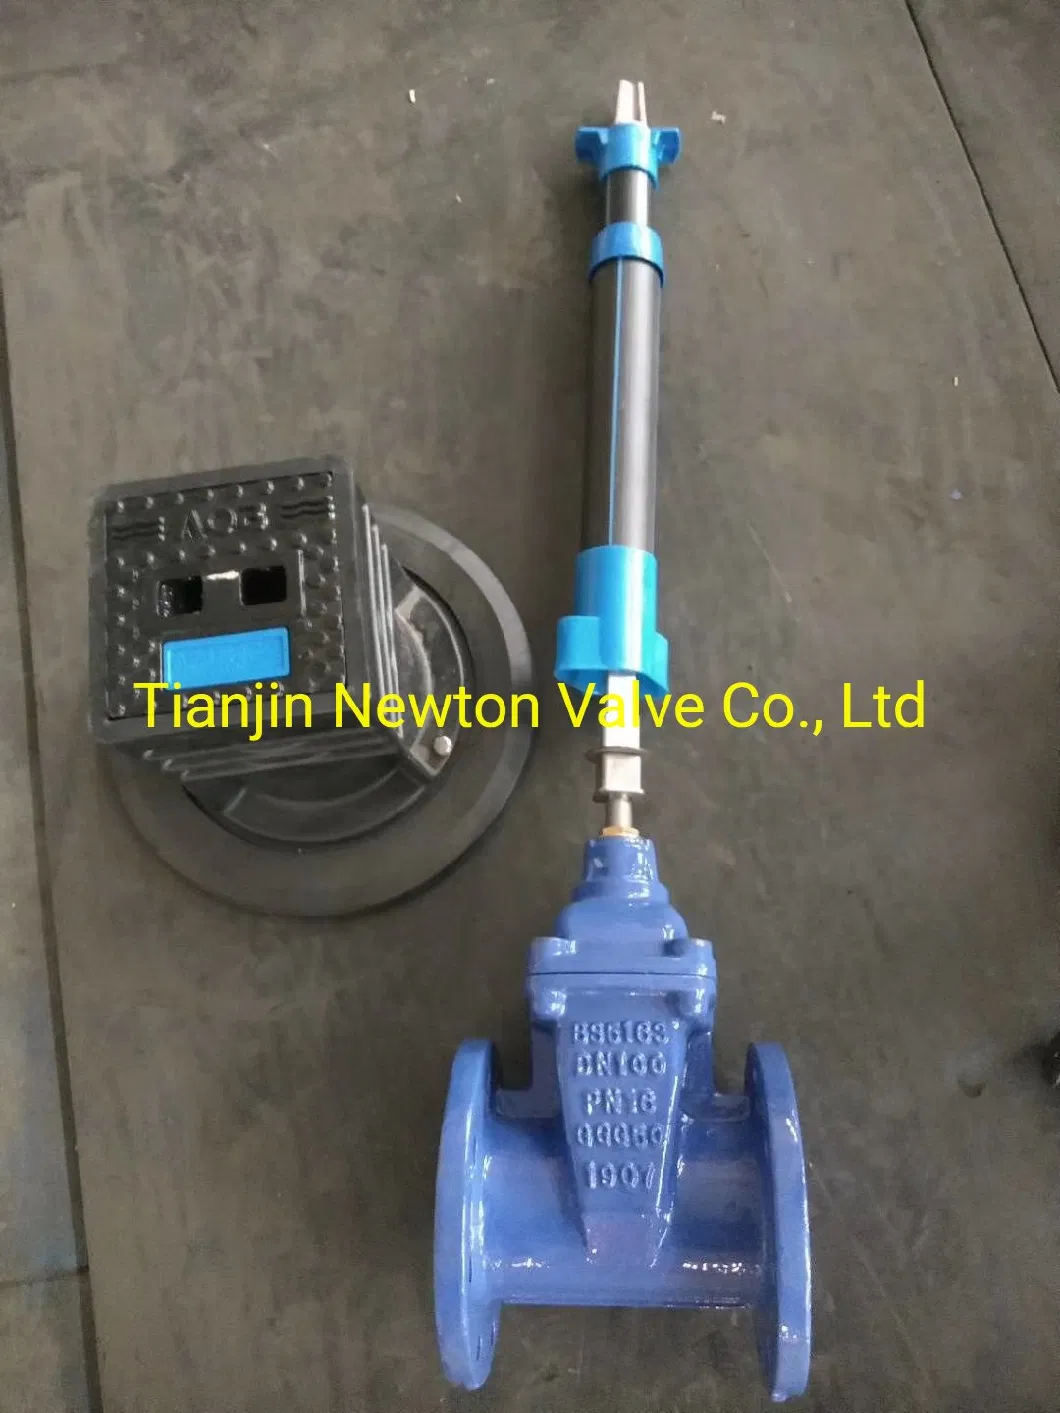 BS5150 BS5163 DIN3352 F4 F5 Awwa C515 C509 API600 API6d Ductile Cast Iron Rubber Coated Solid Wedge Gate Sluice Valve with Gearbox Operator Electric Actuator